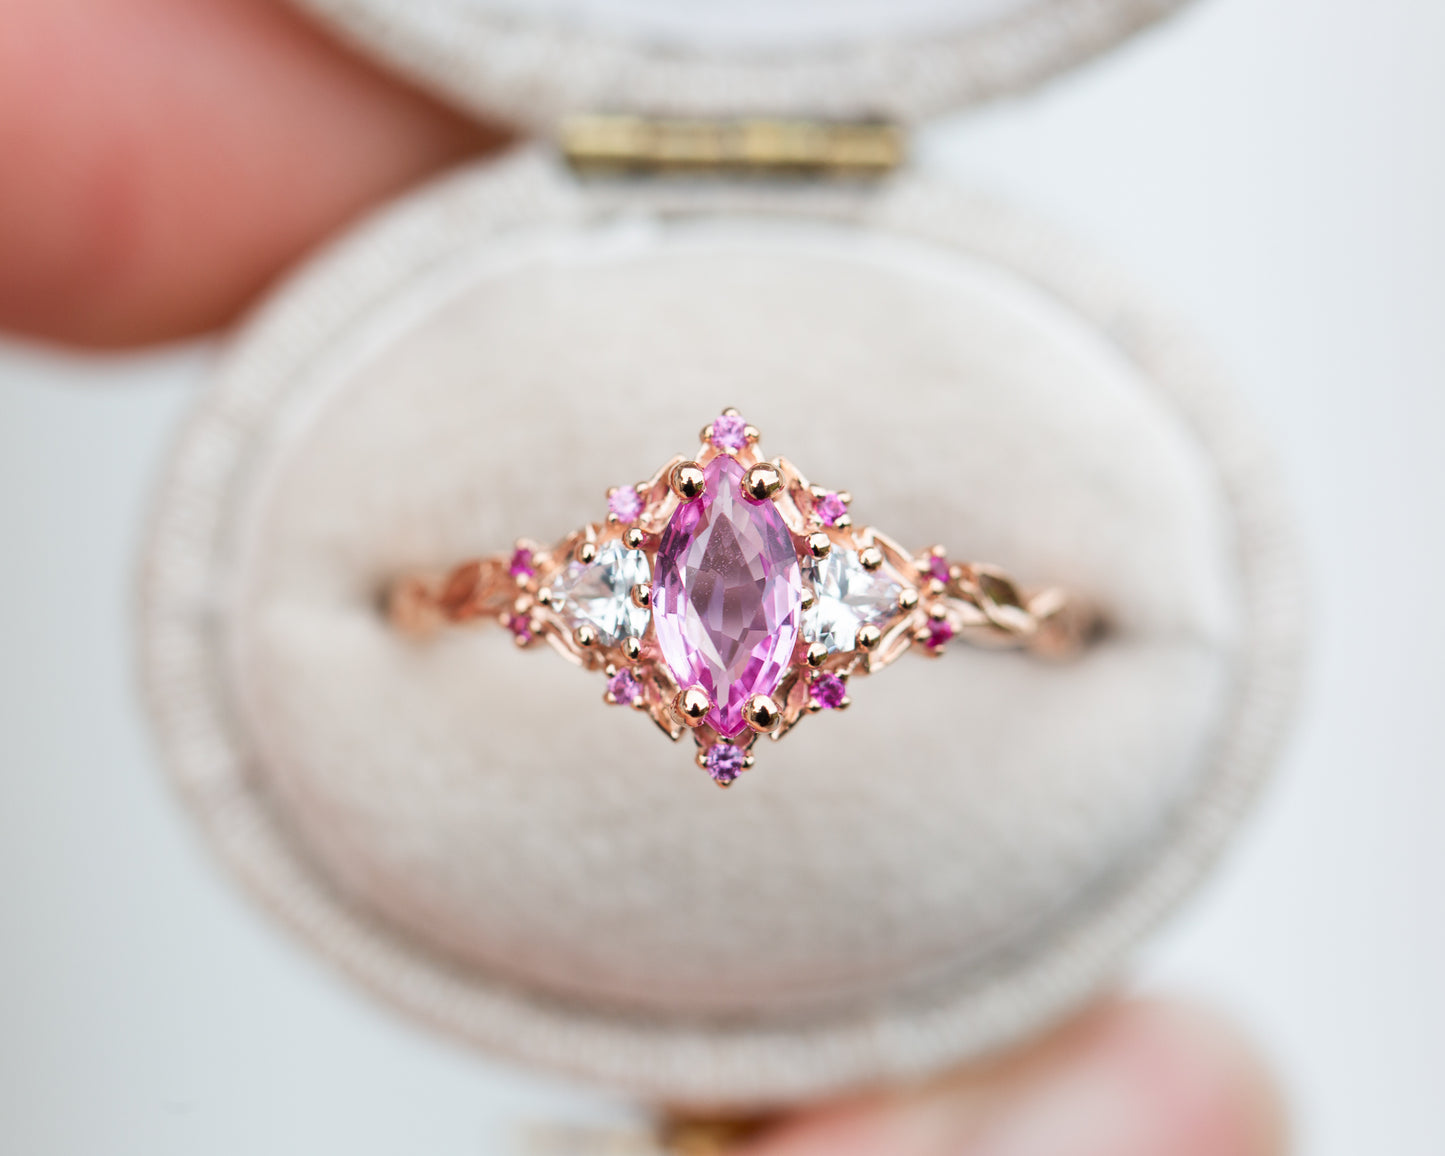 Briar rose three stone with marquise natural pink sapphire center